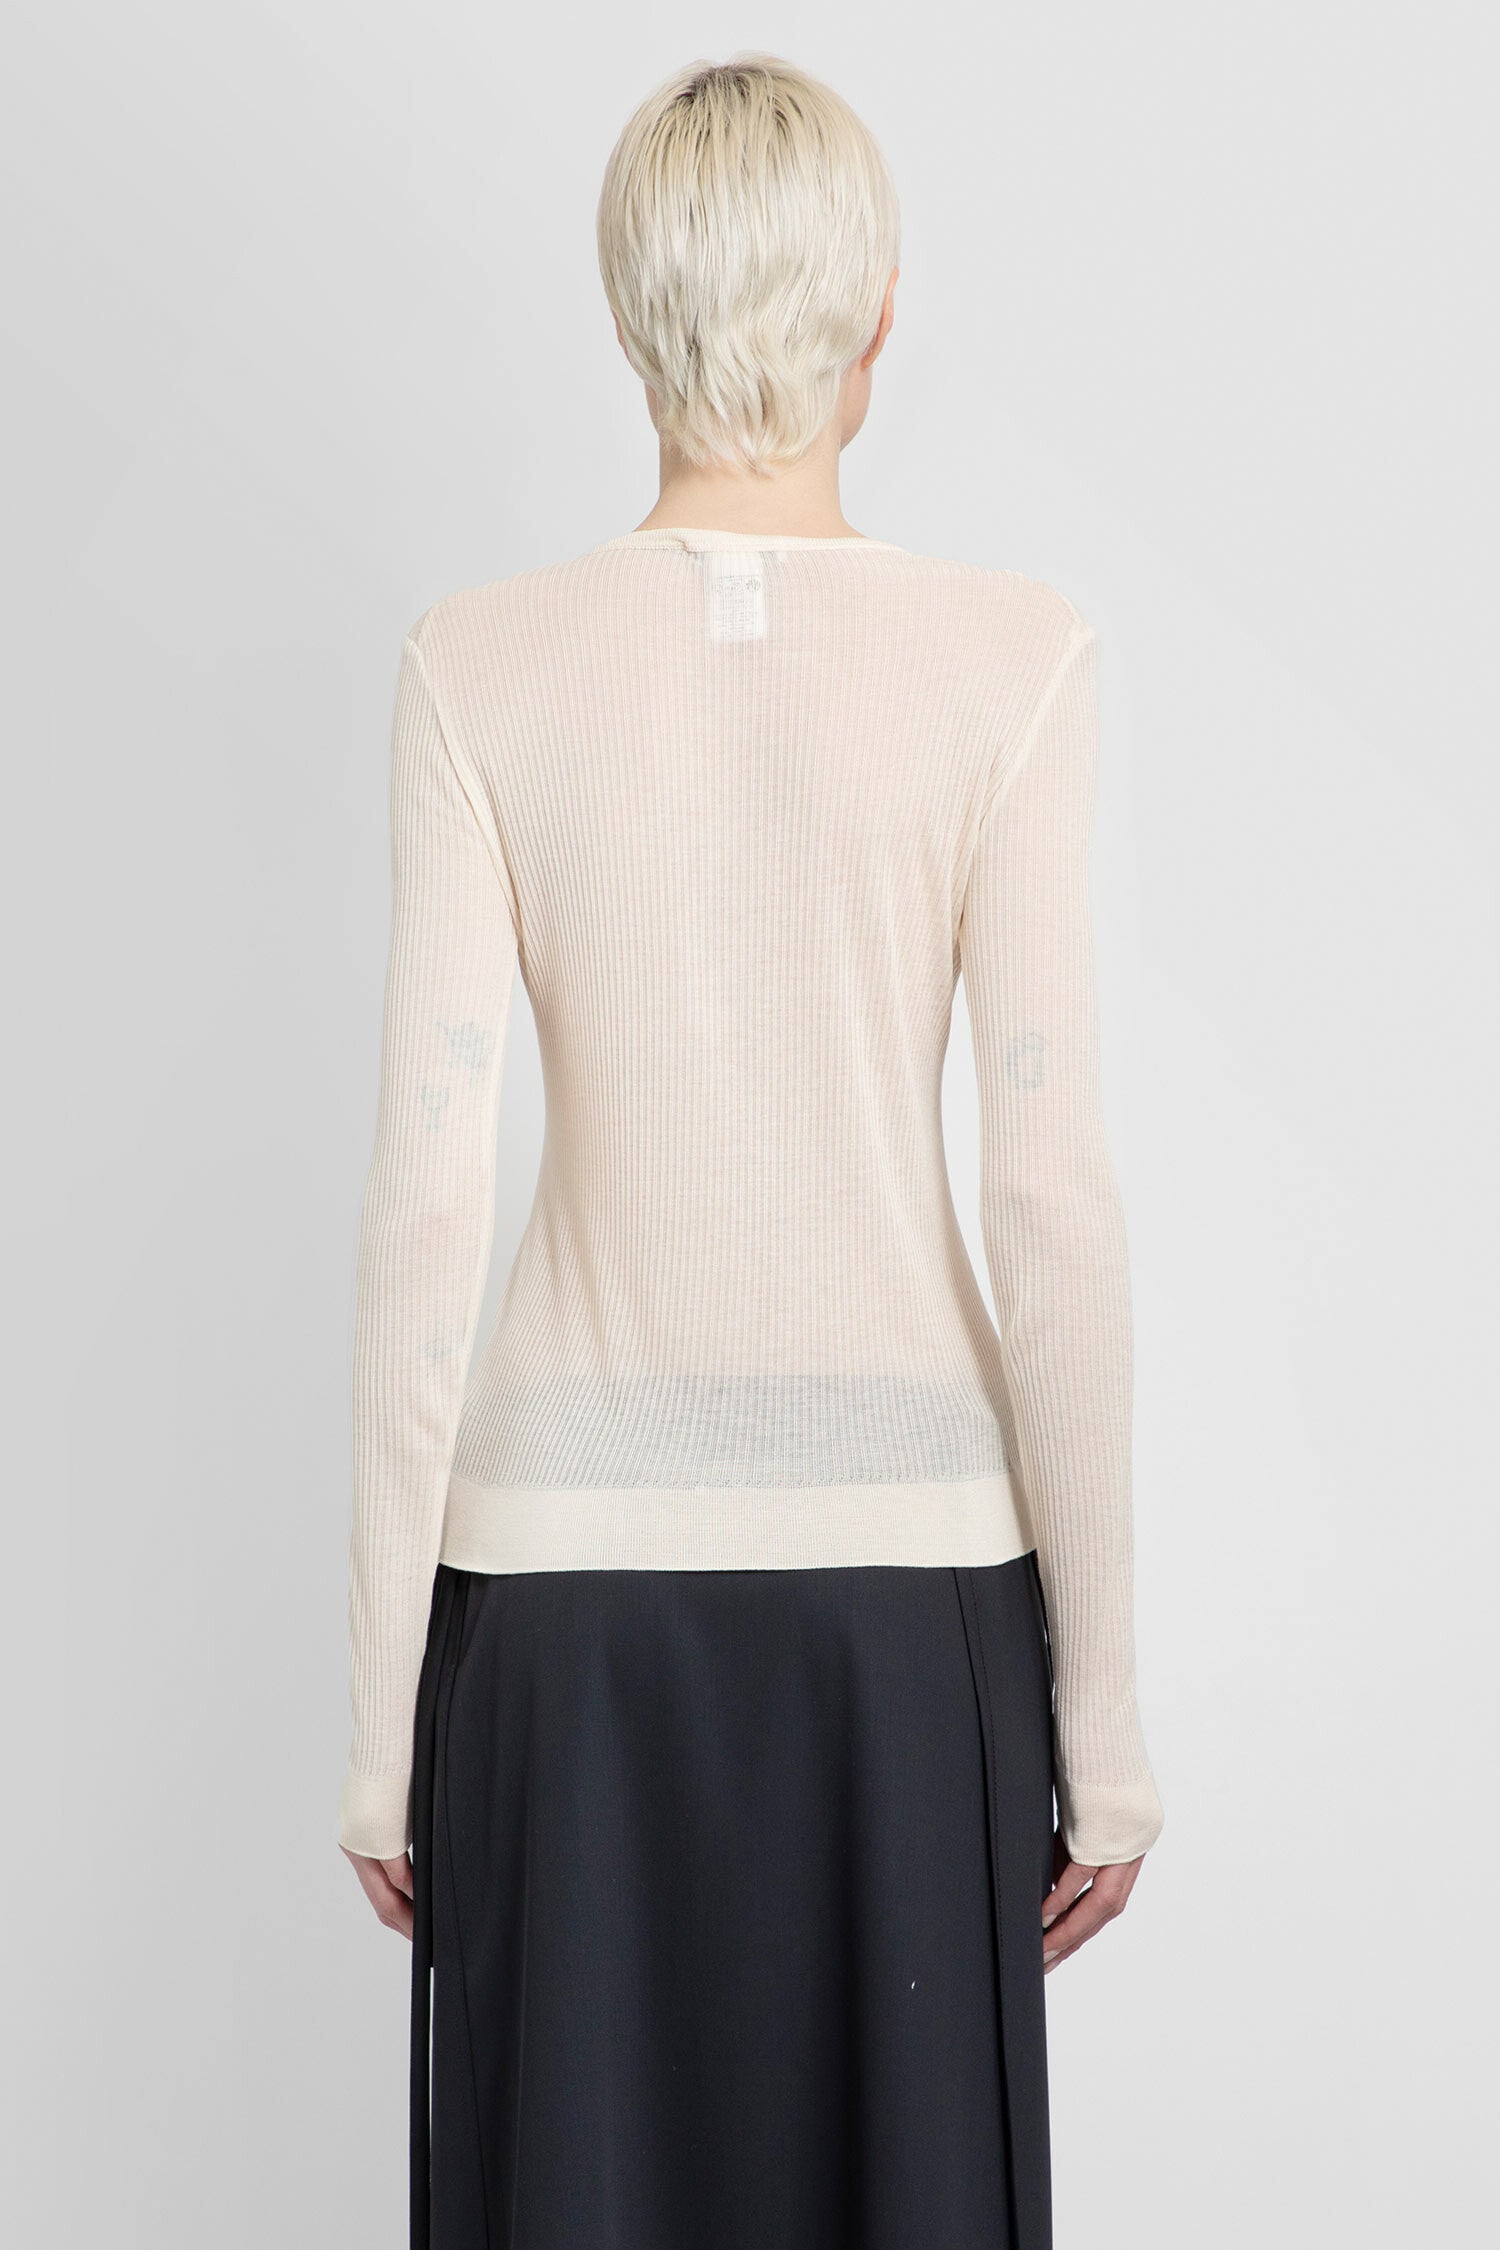 LEMAIRE WOMAN OFF-WHITE TOPS